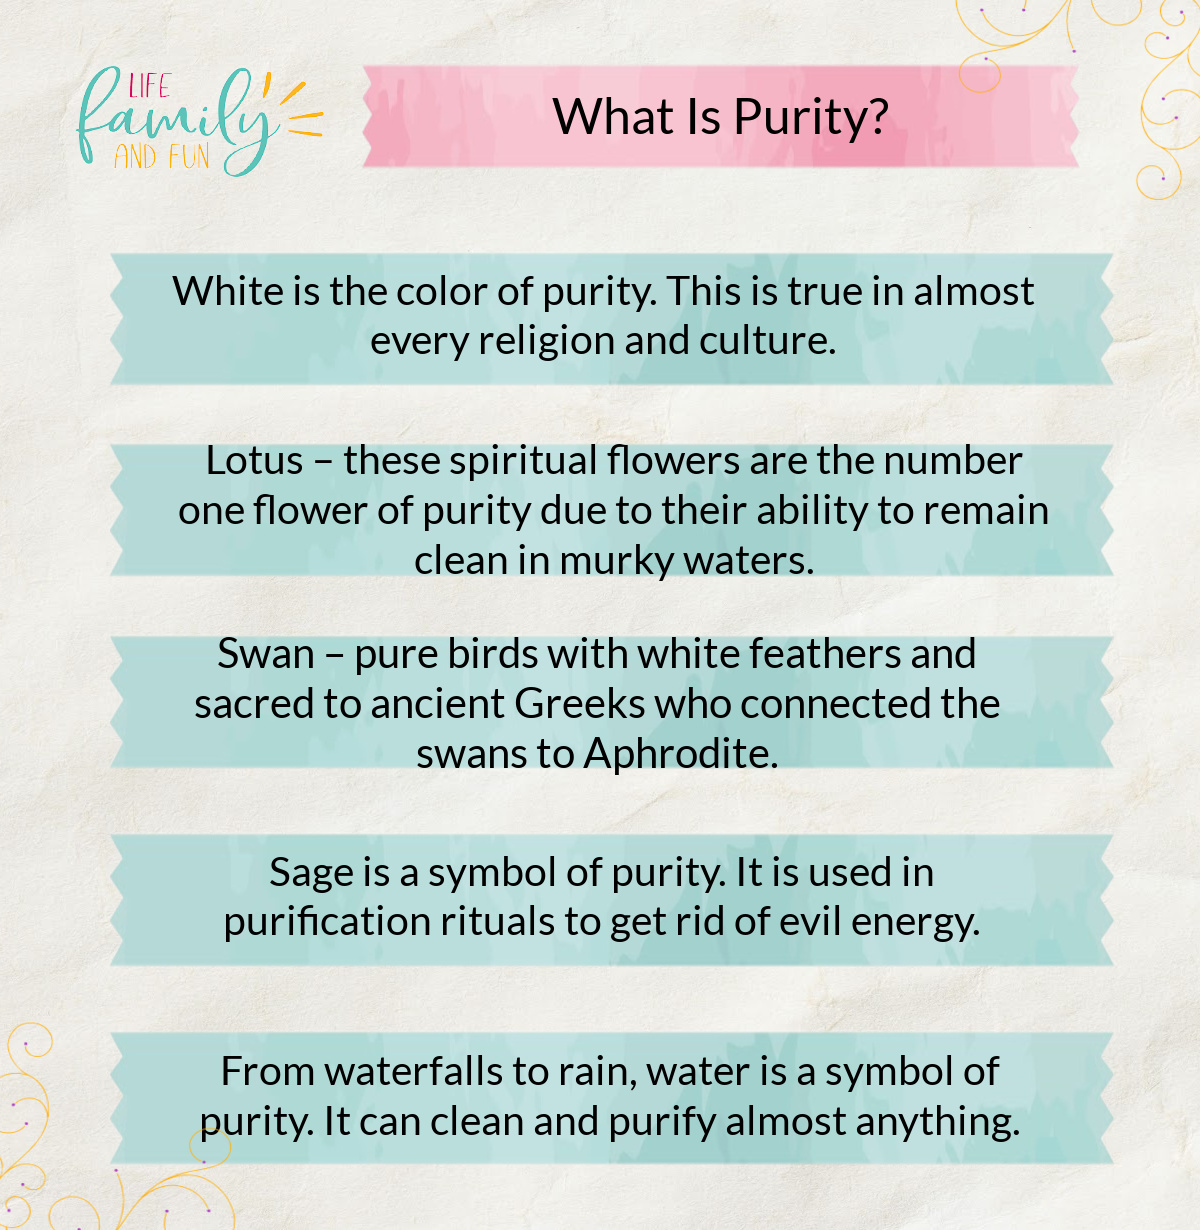 What Is Purity?